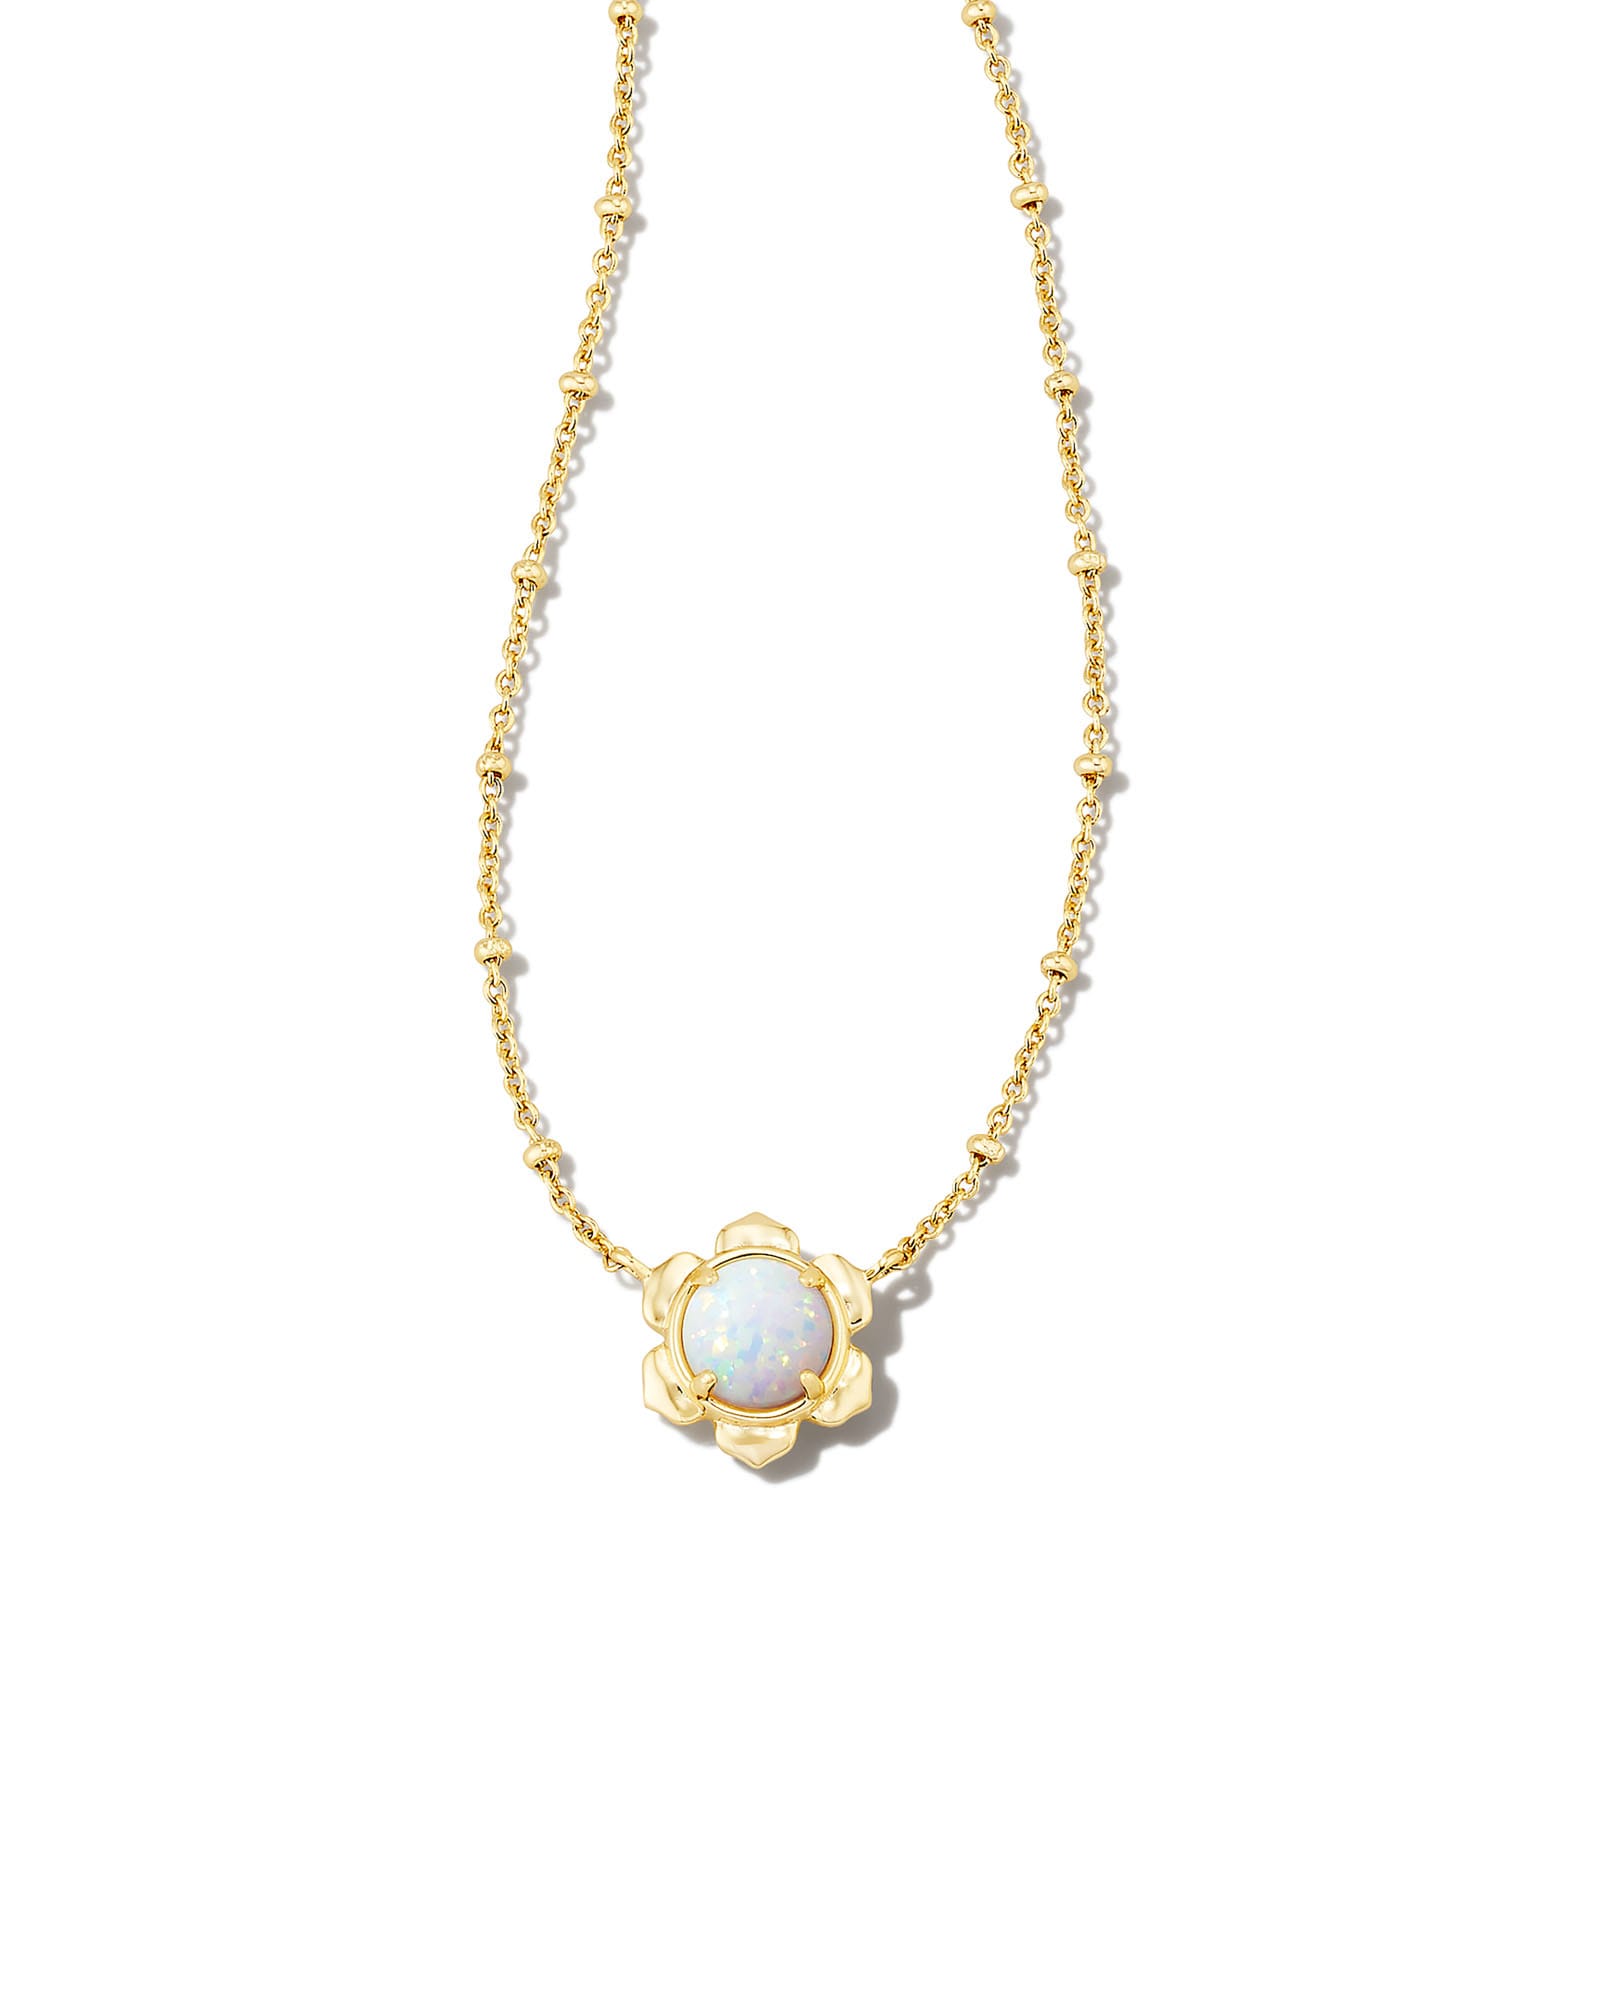 Kendra Scott Susie Gold Short Pendant Necklace in Bright White | Kyocera Opal